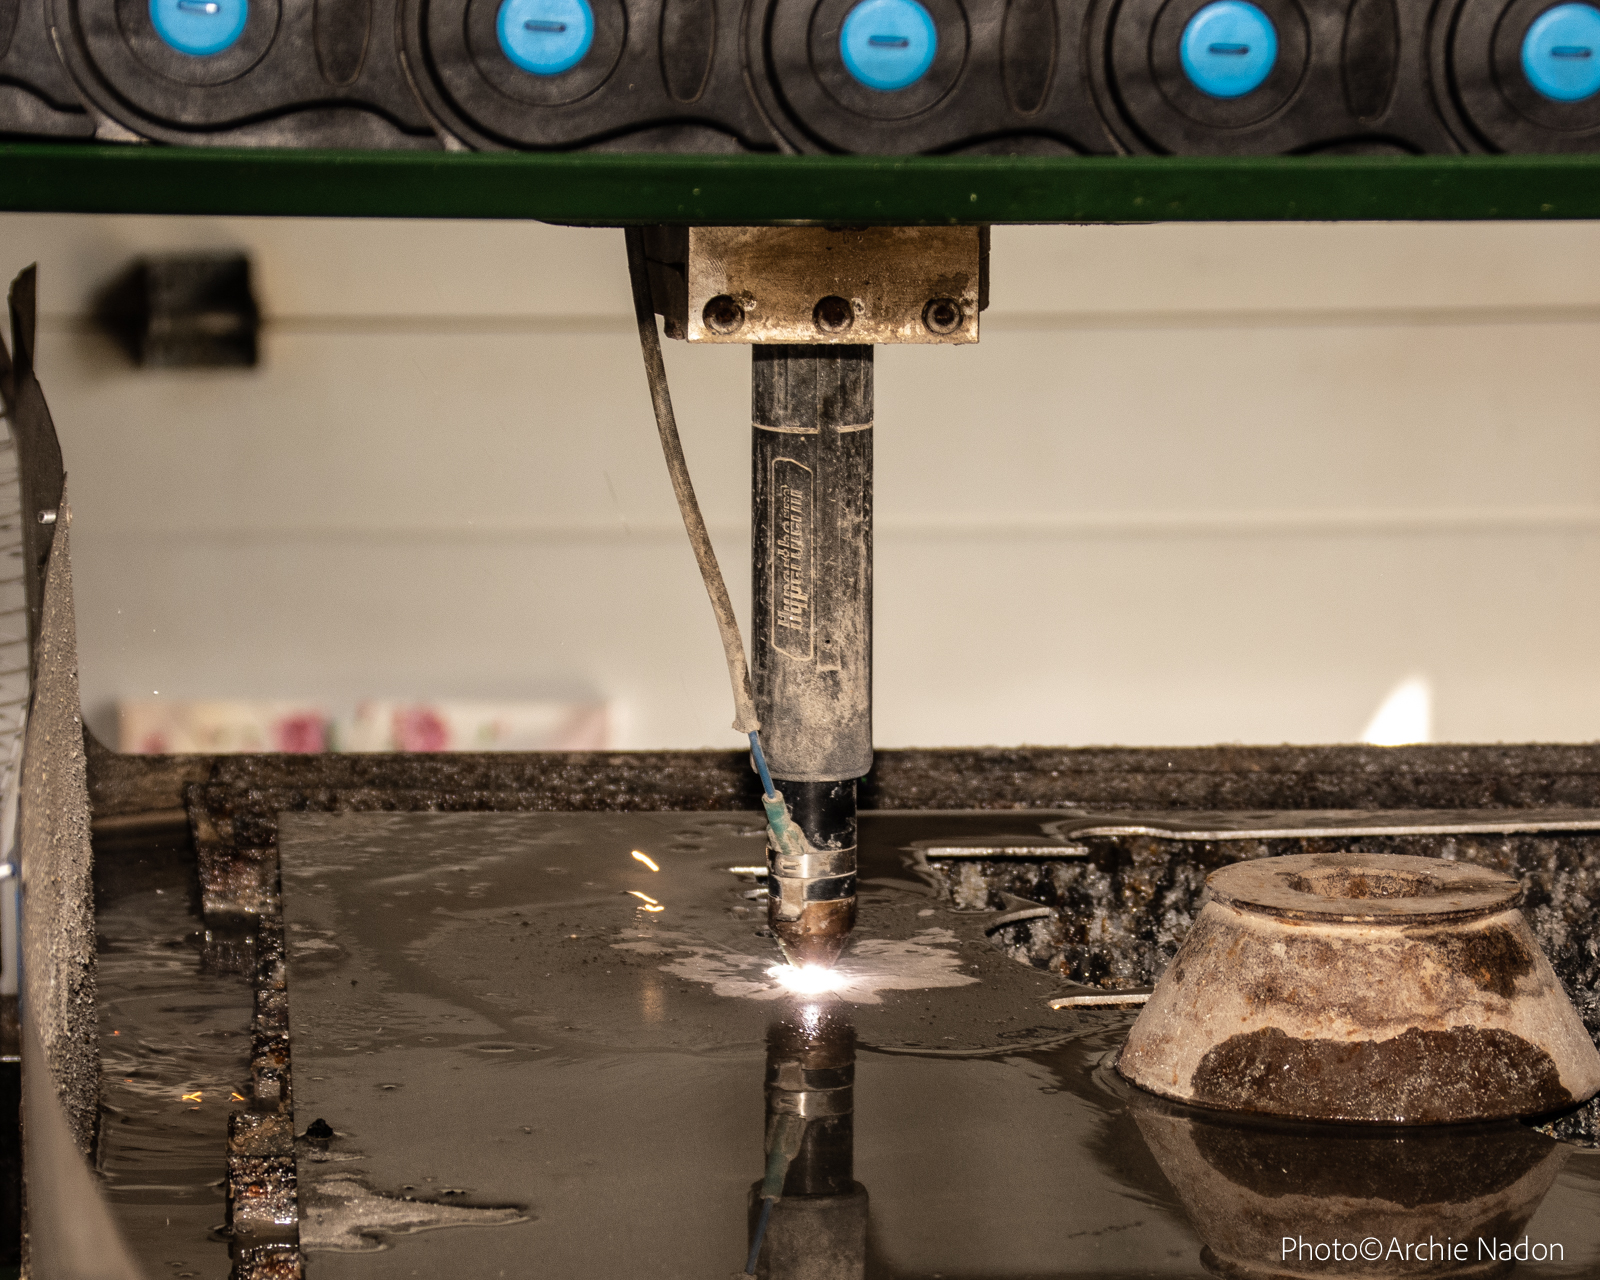 Their CNC plasma cutter uses 220, single phased power with 90-100 pounds air pressure to cut through metal.